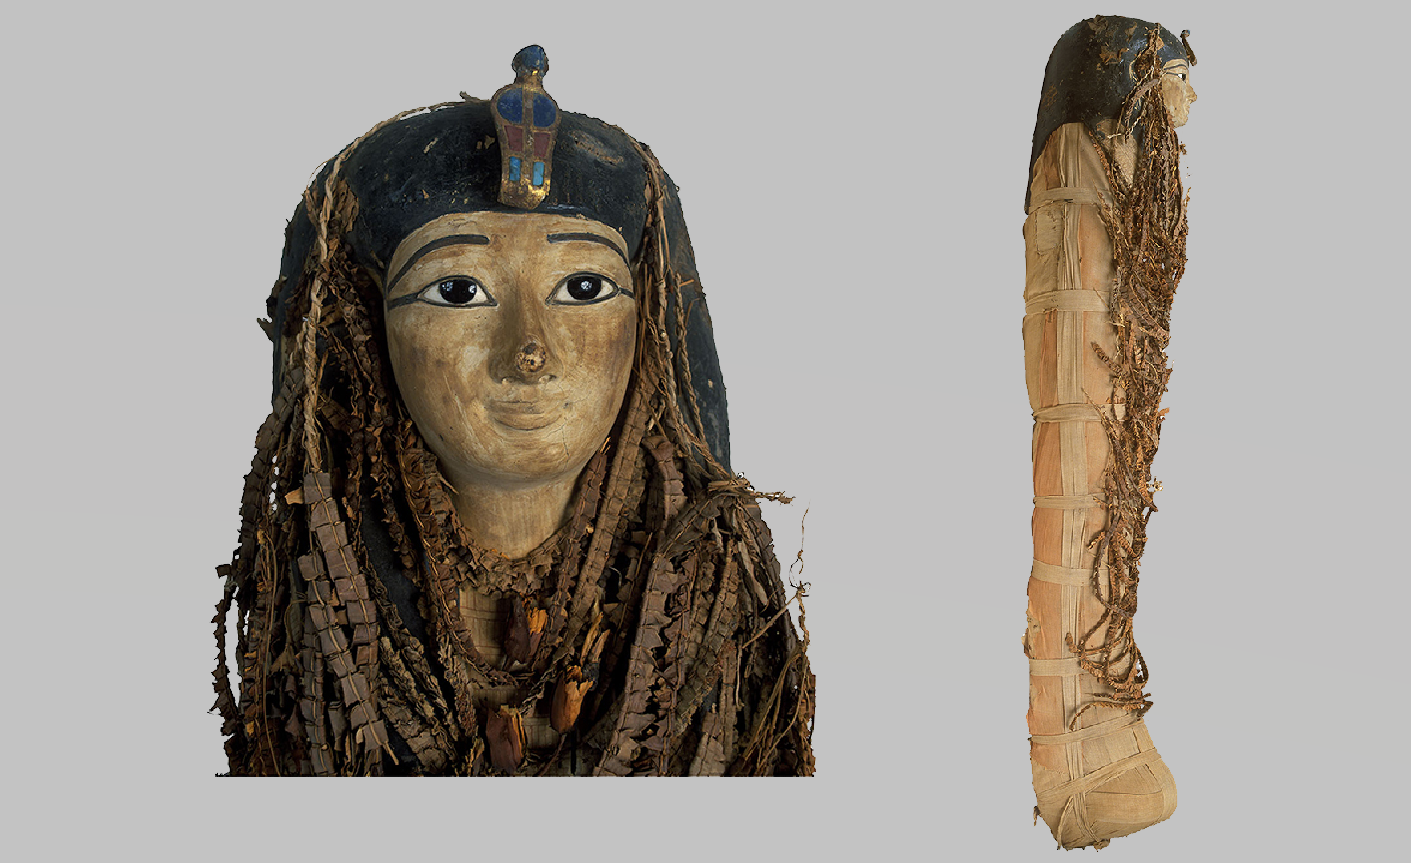 Picture of the ancient Egyptian mummy of Amenhotep I. Credit: Sahar Saleem and Zahi Hawass / Frontiers in Medicine, 2021